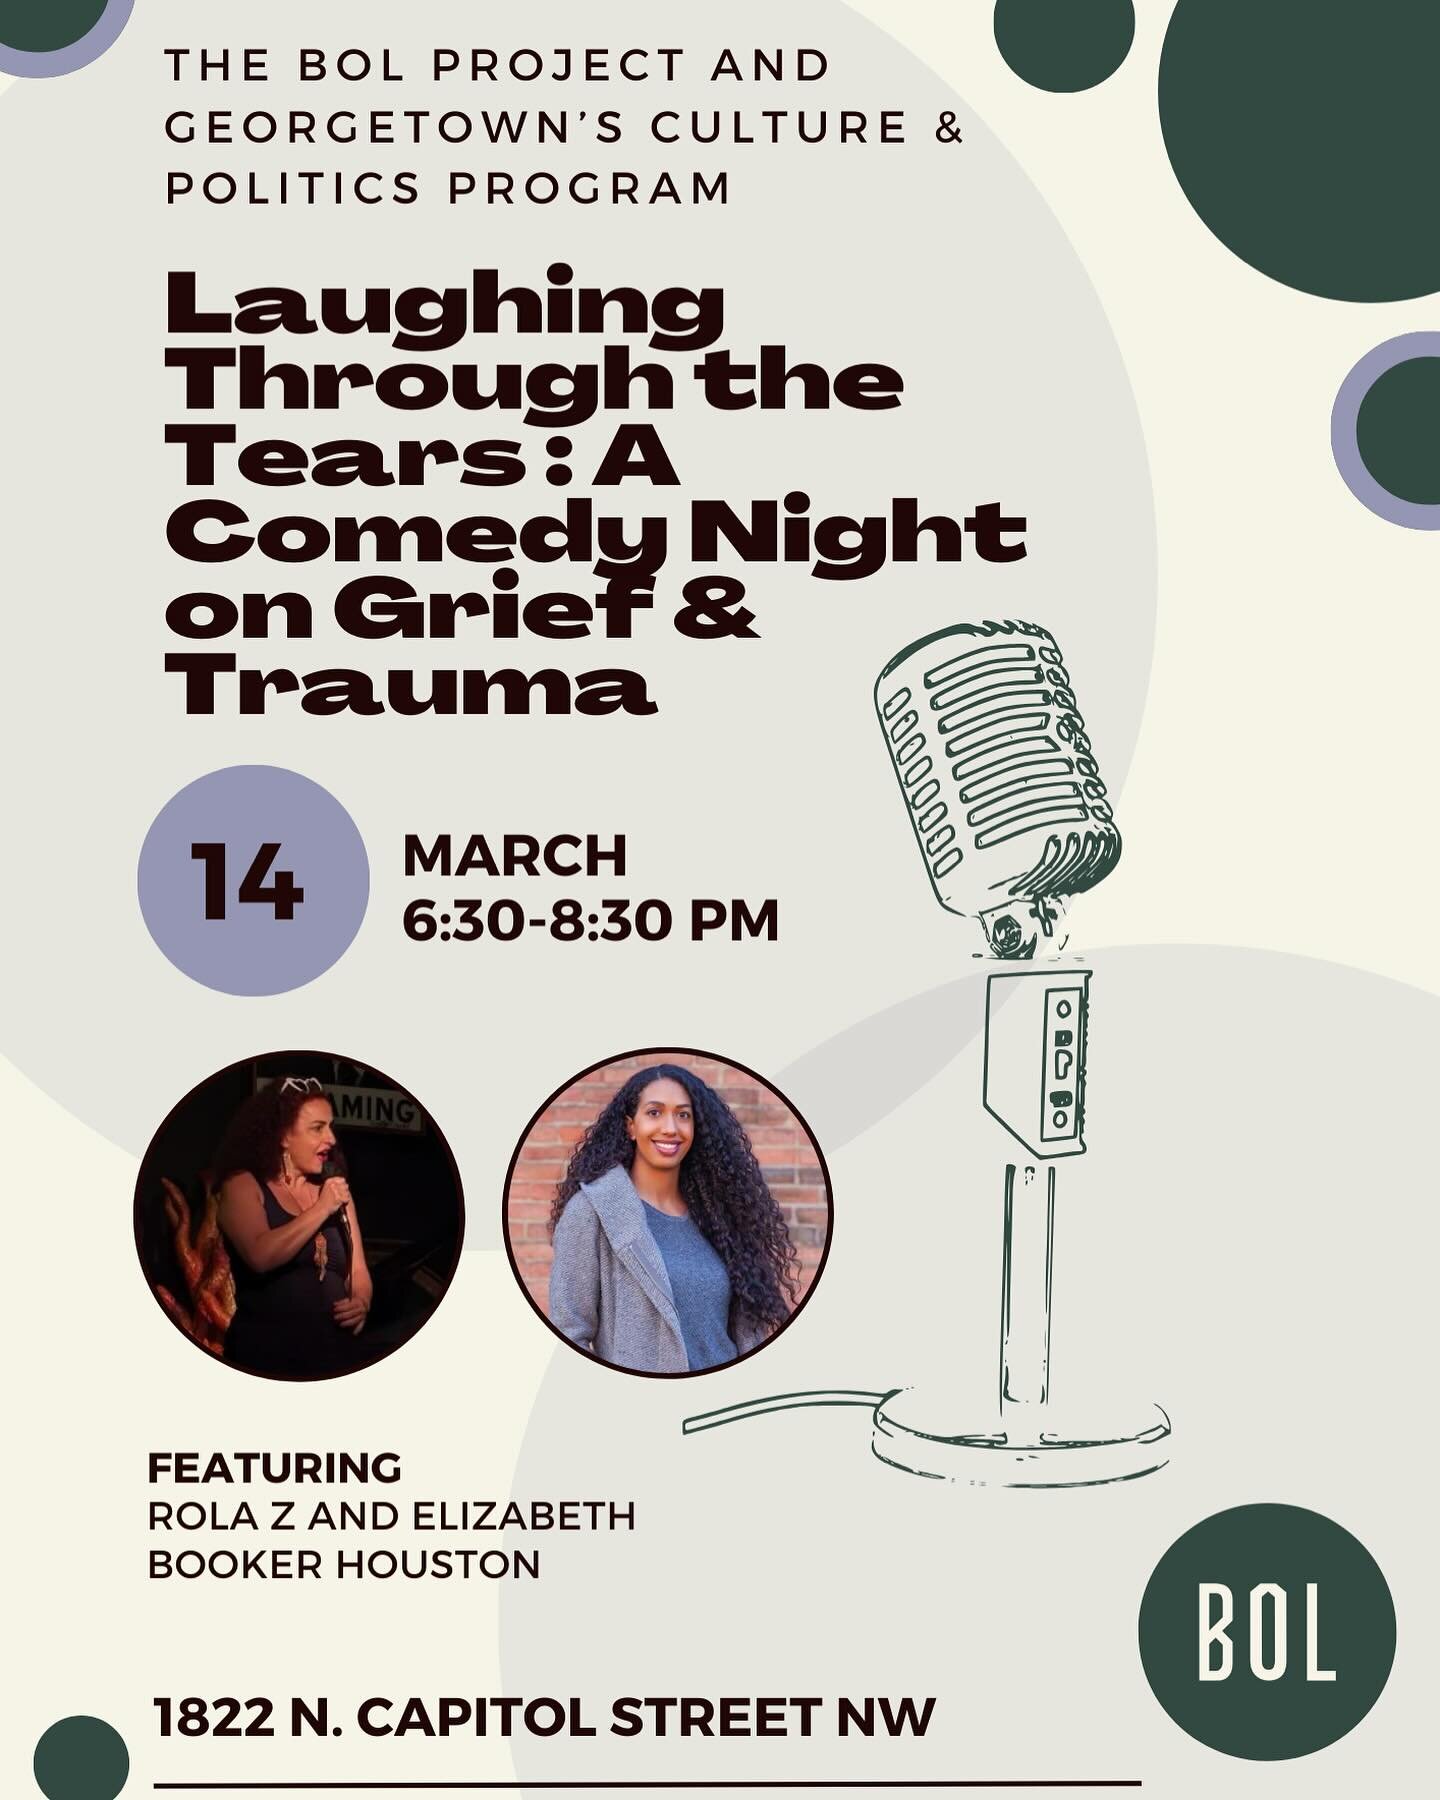 Join us on March 14th from 6:30-8:30 for a Laughing through Tears Comedy Show! 🎭🎭 @creativegroundsdc @culp.georgetown